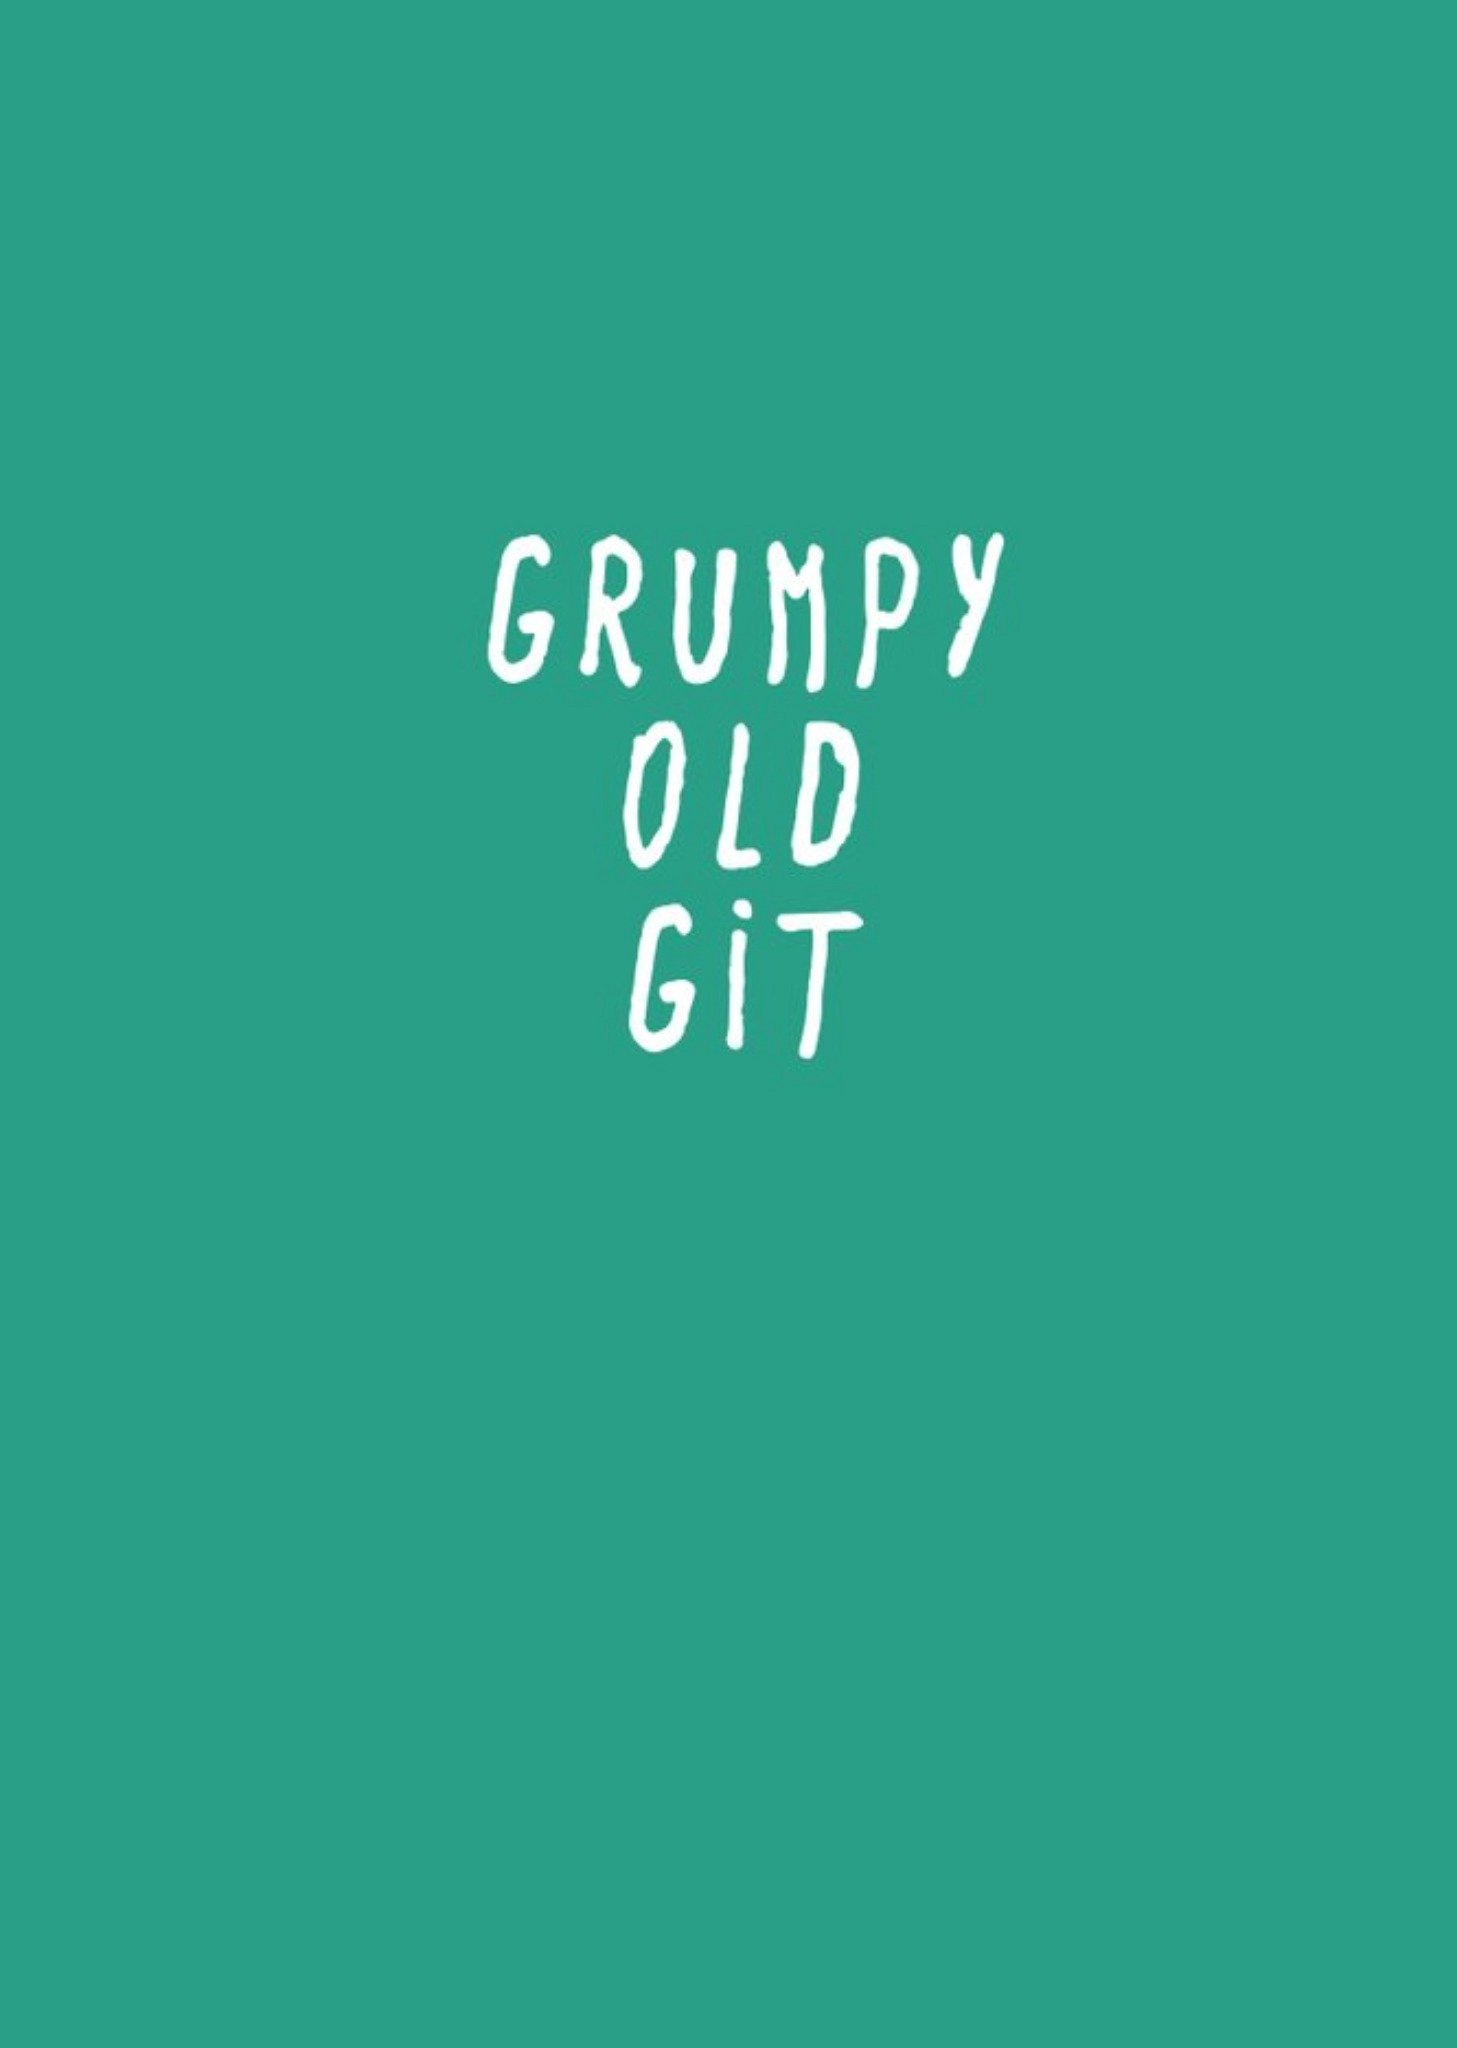 Moonpig Funny Typographical Grumpy Old Git Card, Large